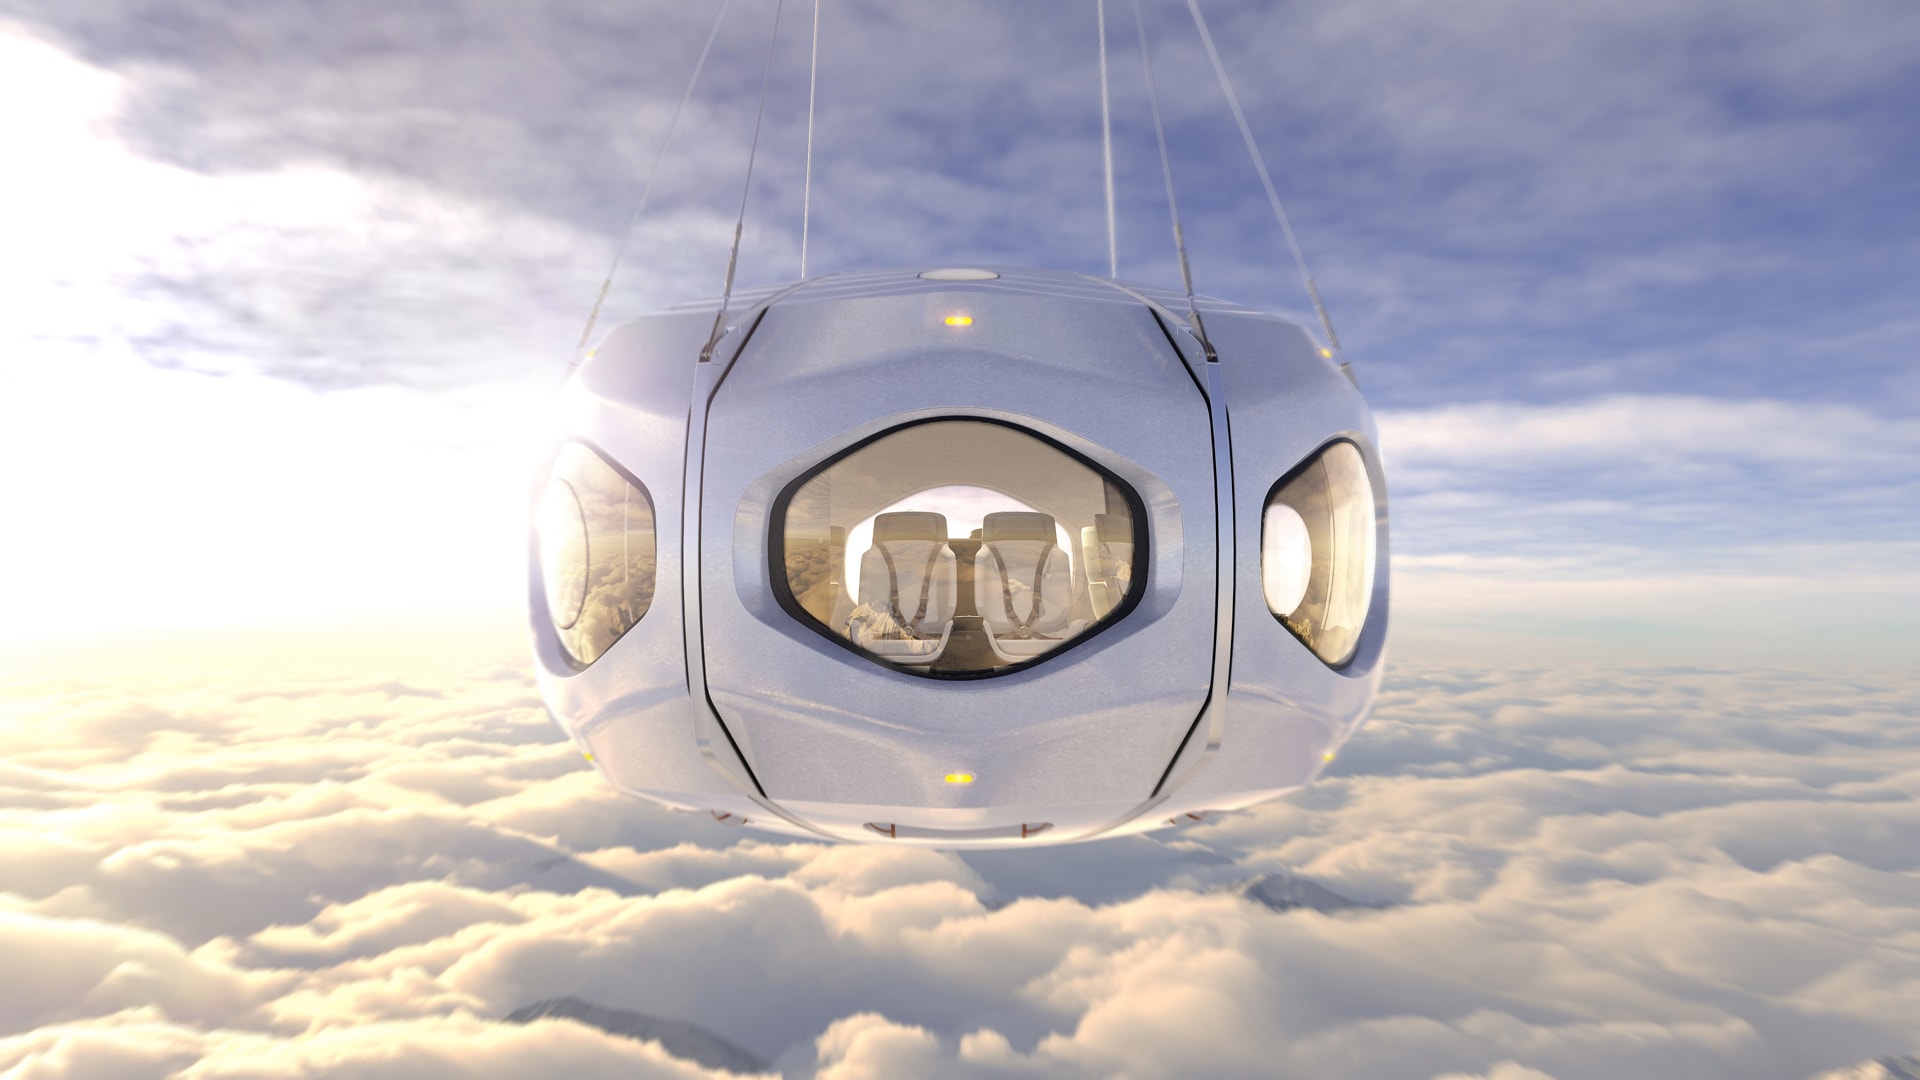 This giant balloon will take you to the edge of space—for just $50,000